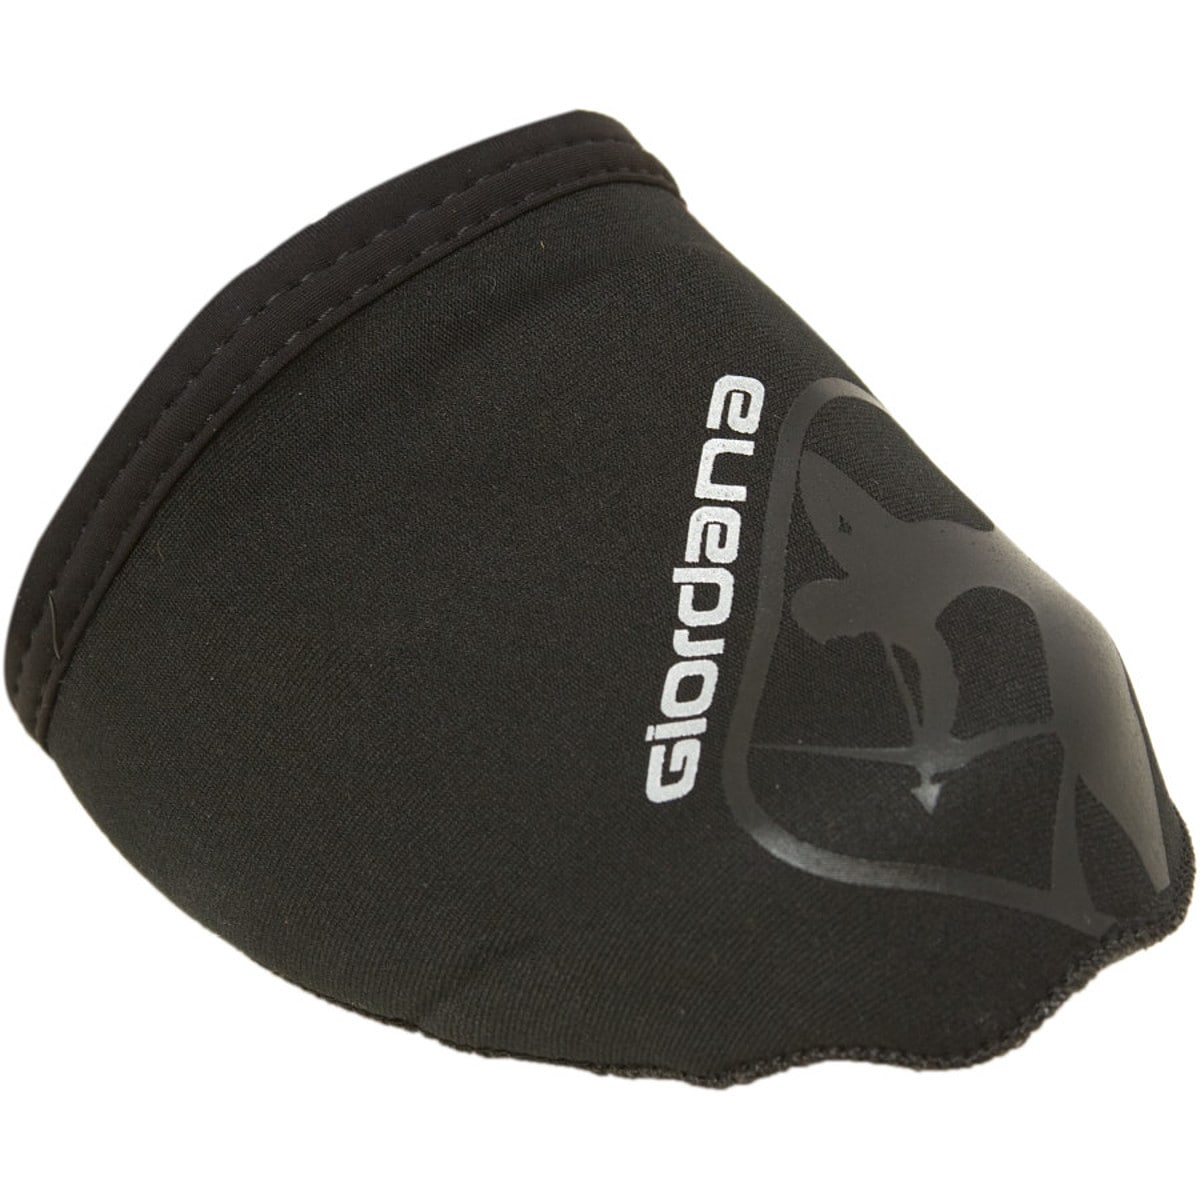 Giordana Toester Shoes Toe Covers Black, XL